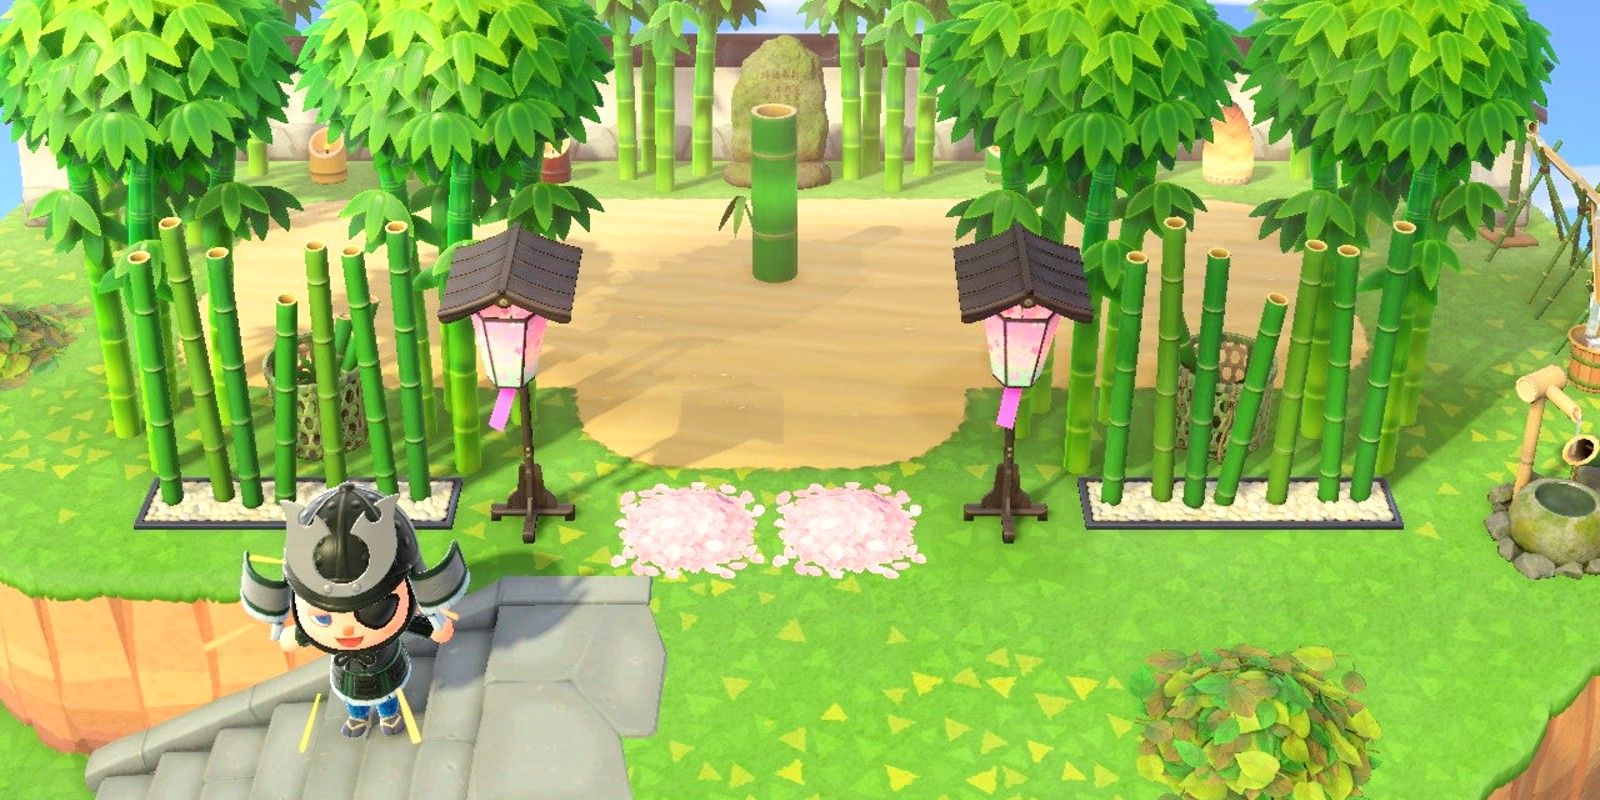 Front Yard Design Ideas & Tips in Animal Crossing New Horizons